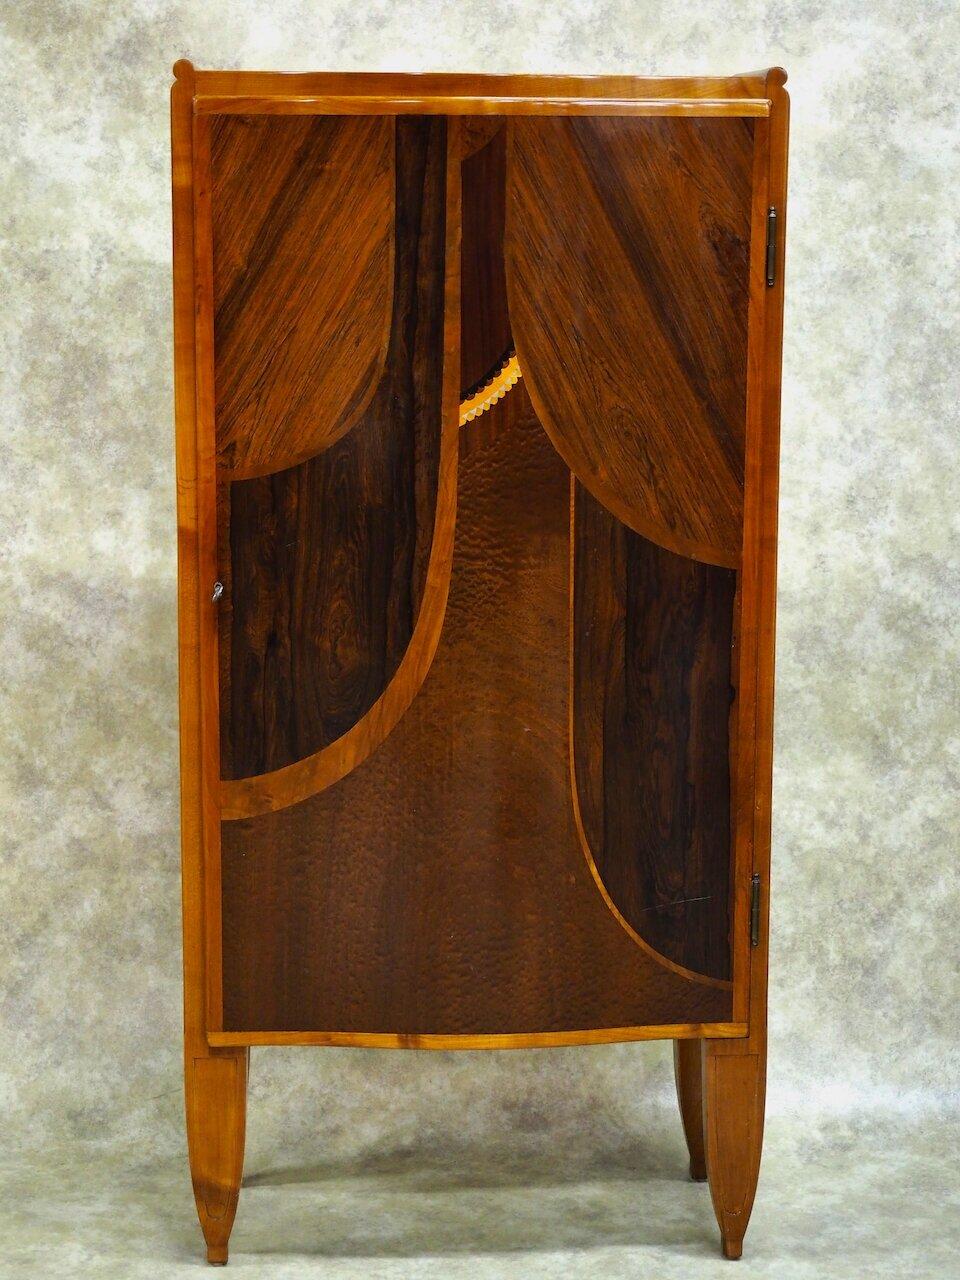 Classic French Art Deco cabinet by Henri Rapin, 1925, in cherry, rosewood, burled mahogany, ebony, and silvered metal. Finished interior with shelves. 31.5